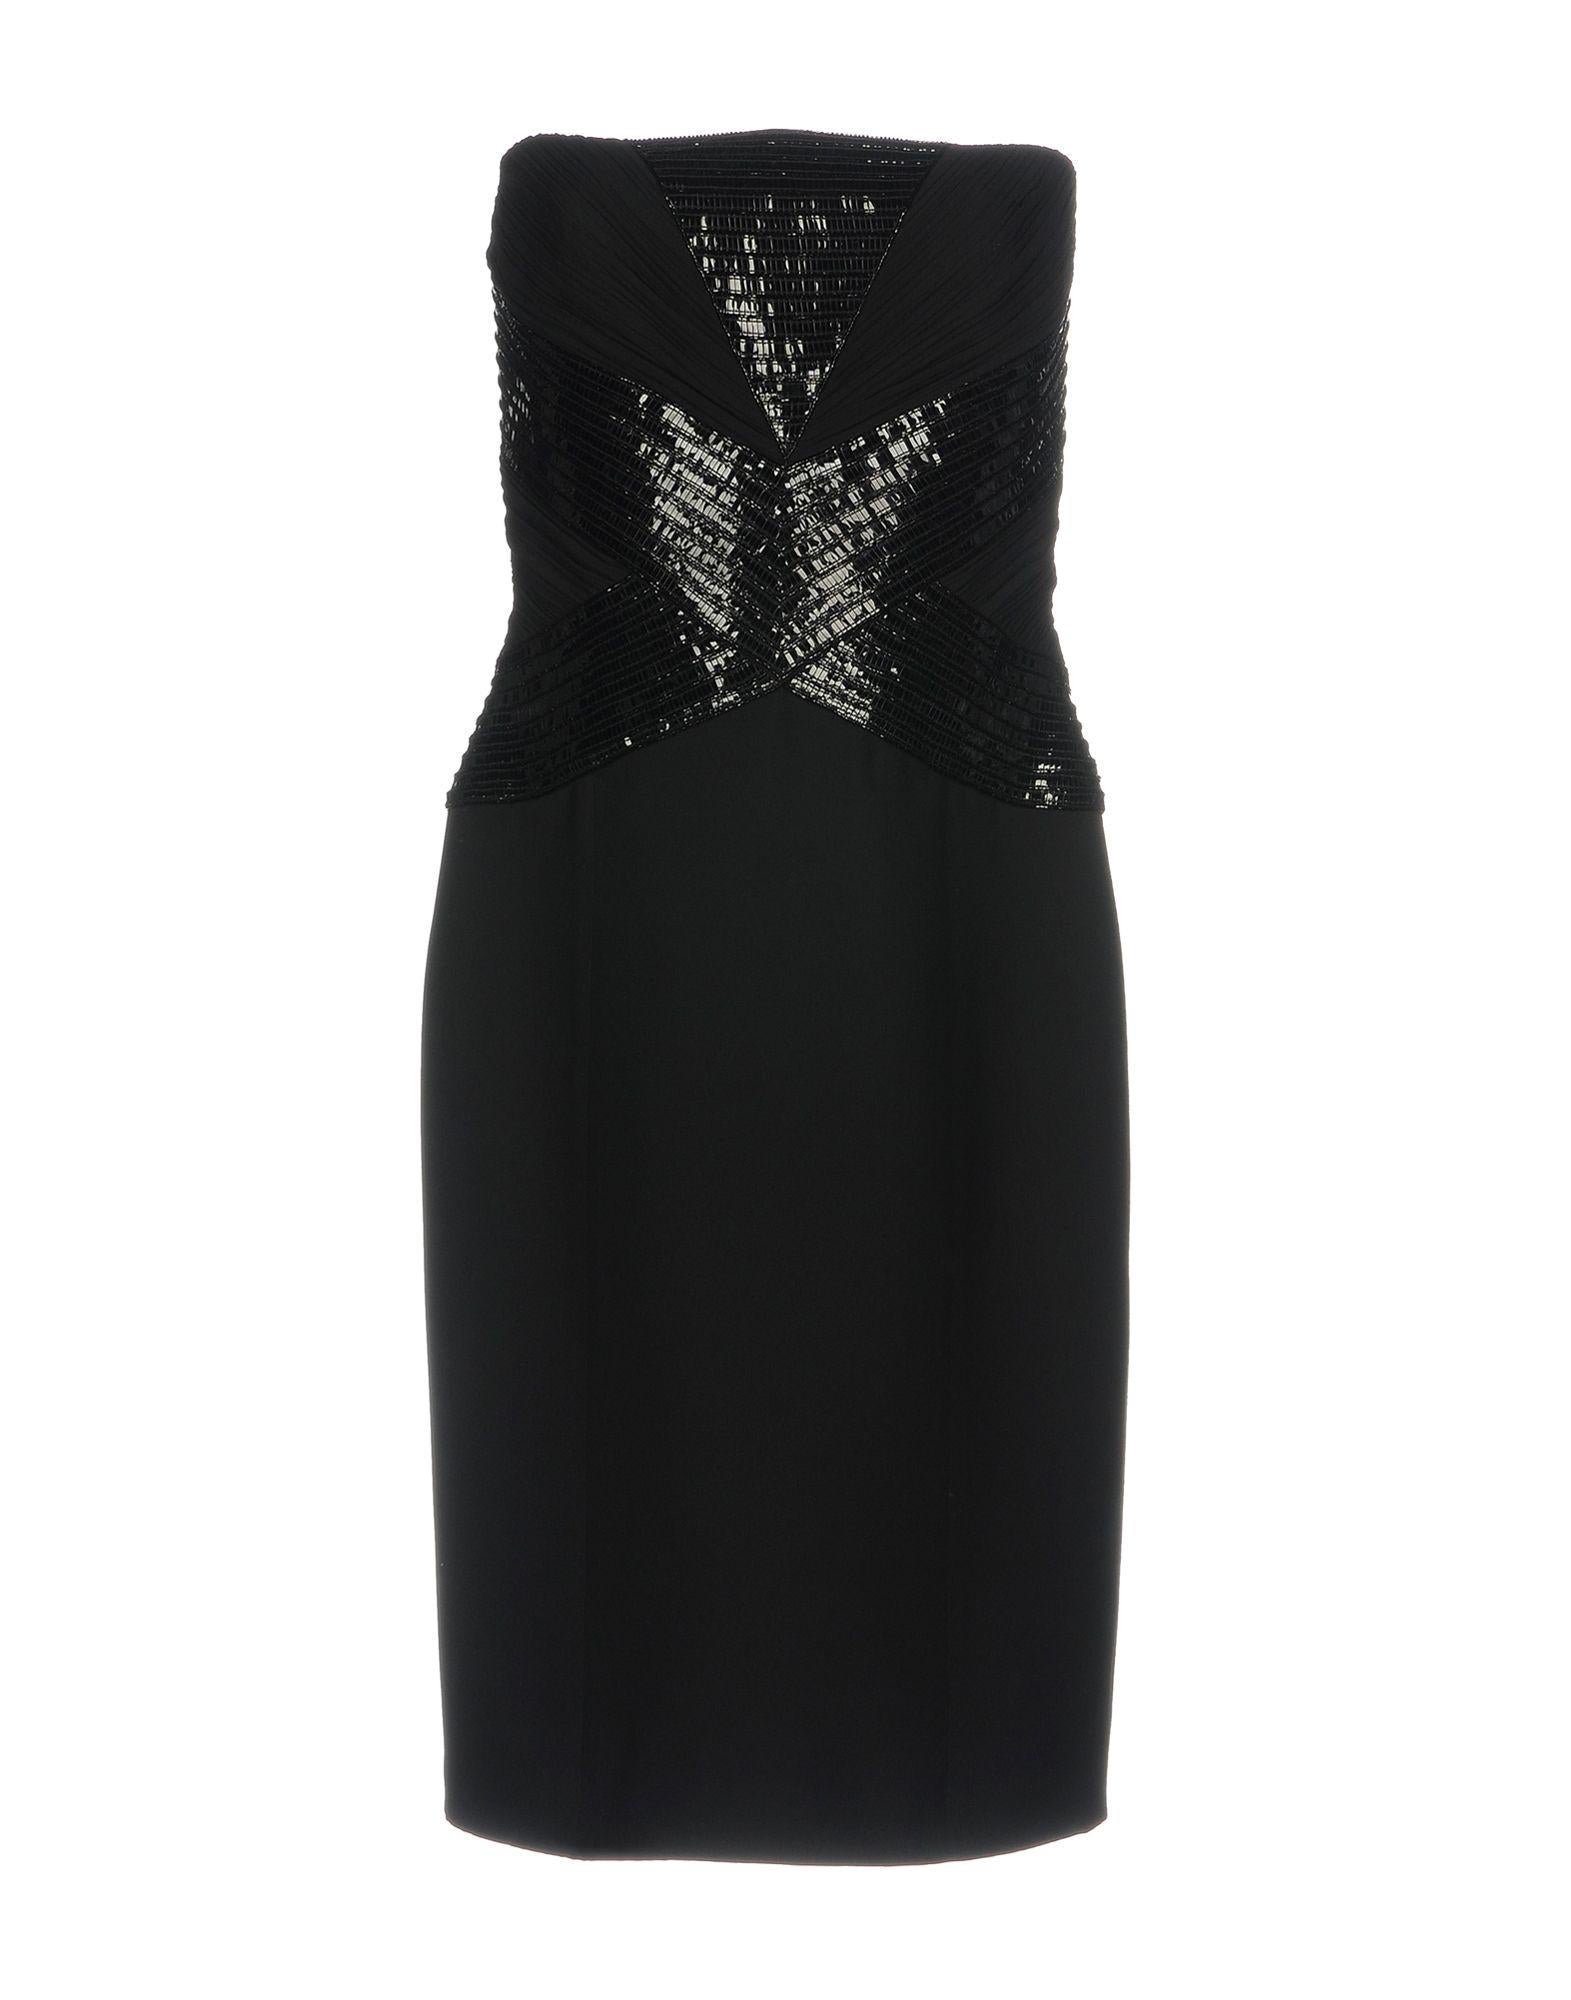 New Versace Patent Leather Embellished Silk Black Cocktail Strapless Dress 40 For Sale 7